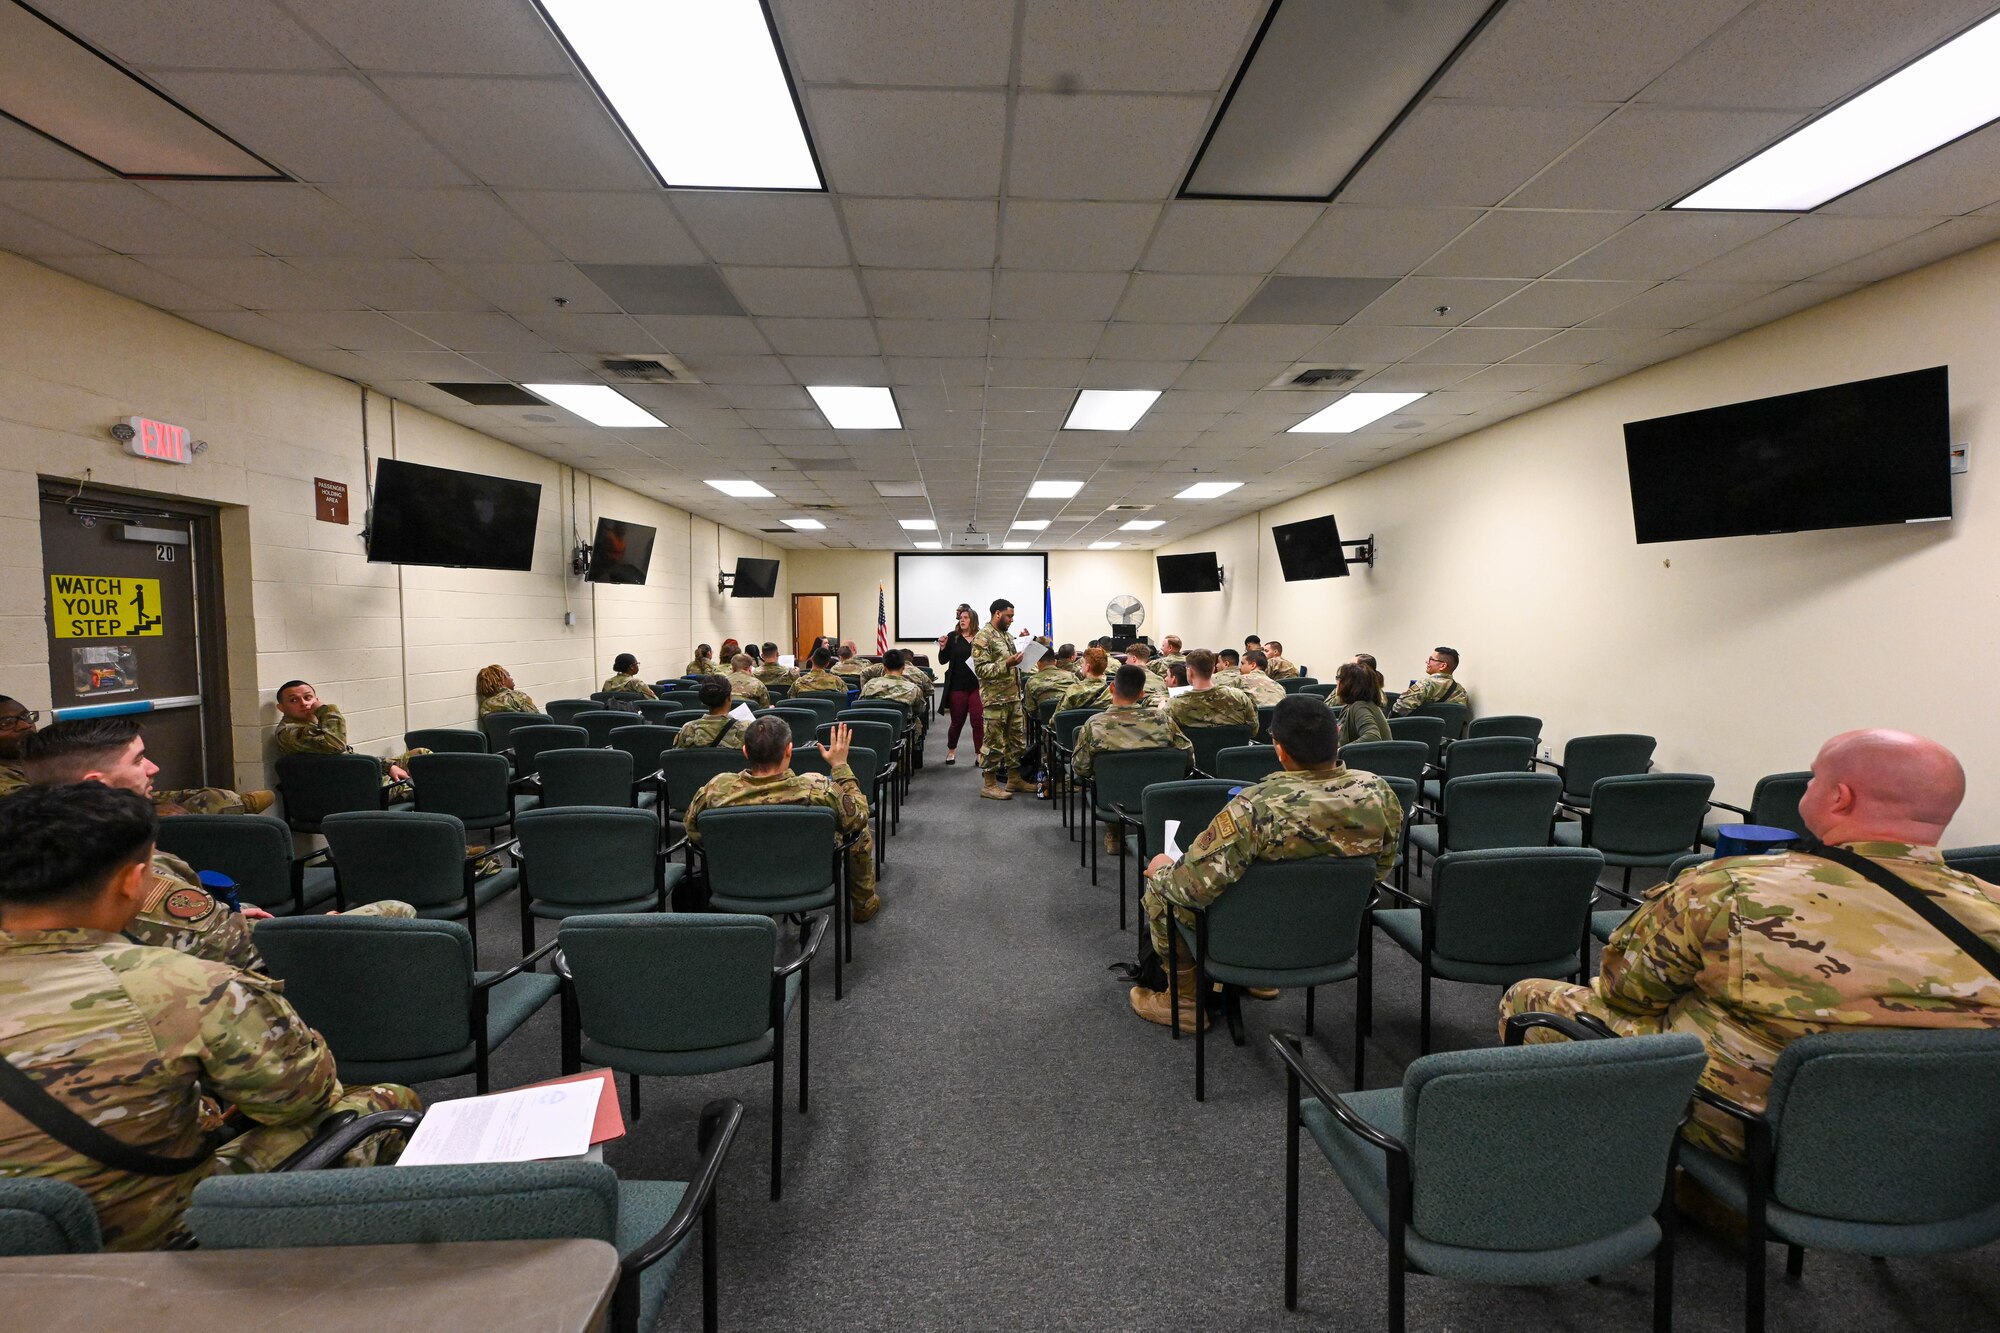 Airmen from the 97th Air Mobility Wing wait for a briefing during an exercise at Altus Air Force Base, Oklahoma, May 2, 2023. The Airmen received multiple pre-deployment briefs before going to the Chemical Biological Radiological Nuclear portion of their exercise. (U.S. Air Force photo by Senior Airman Trenton Jancze)